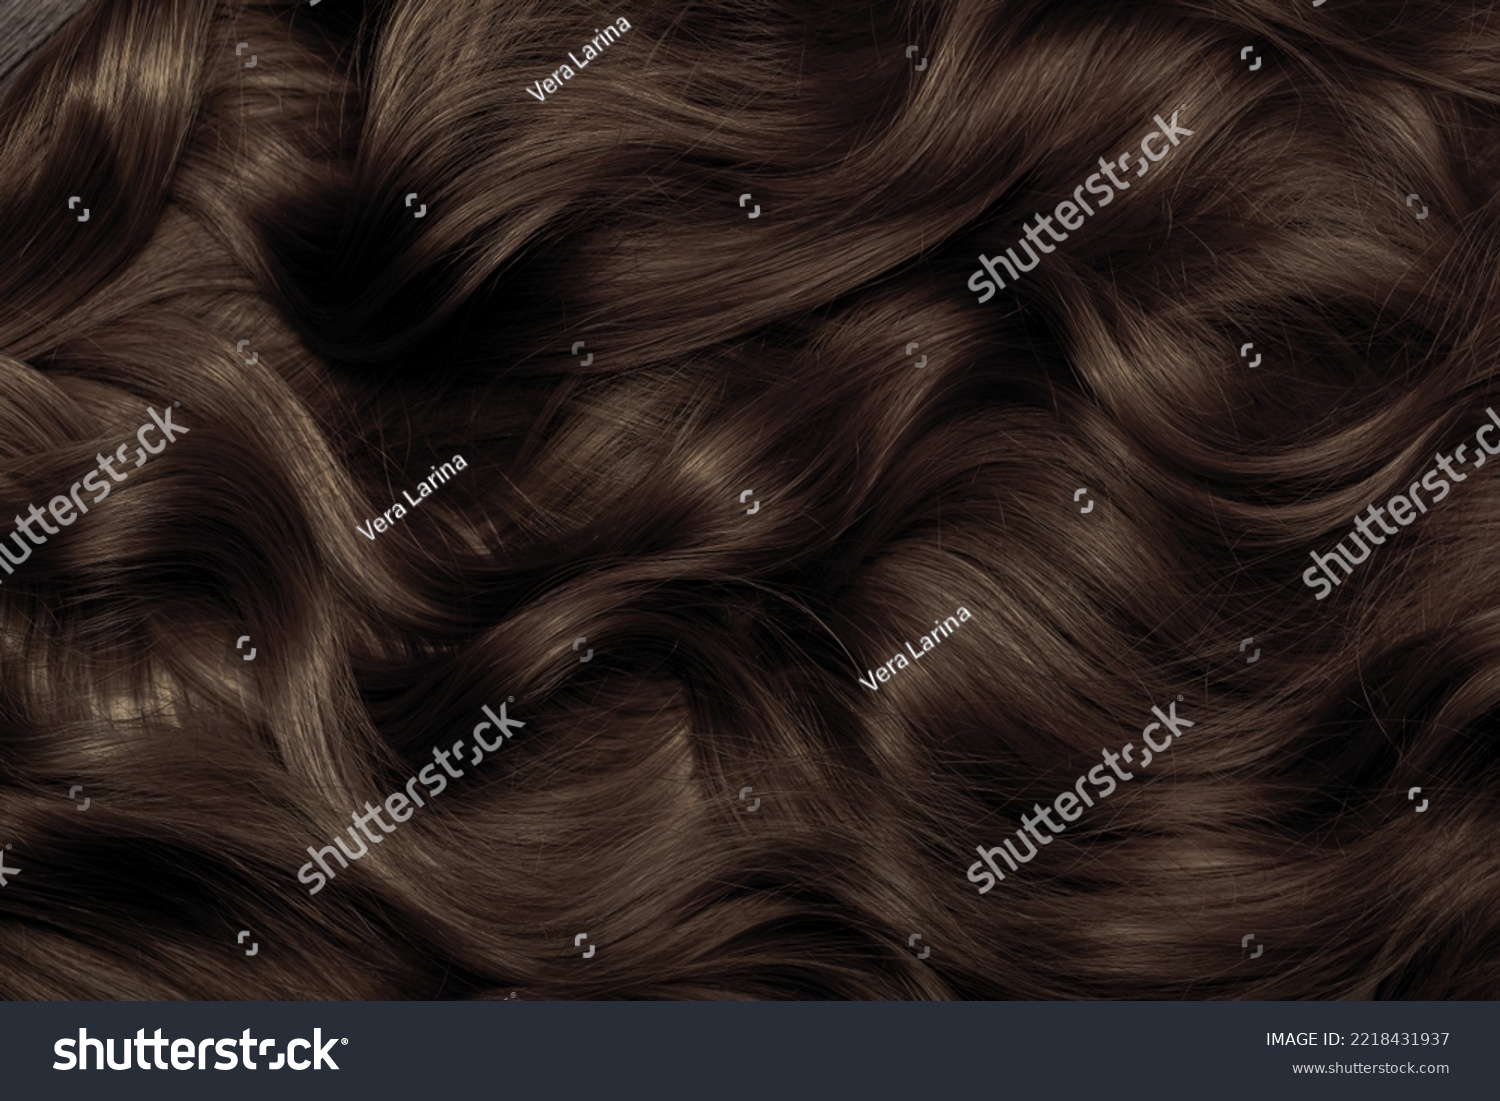 Brown hair close-up as a background. Women's long brown hair. Beautifully styled wavy shiny curls. Hair coloring. Hairdressing procedures, extension. #2218431937